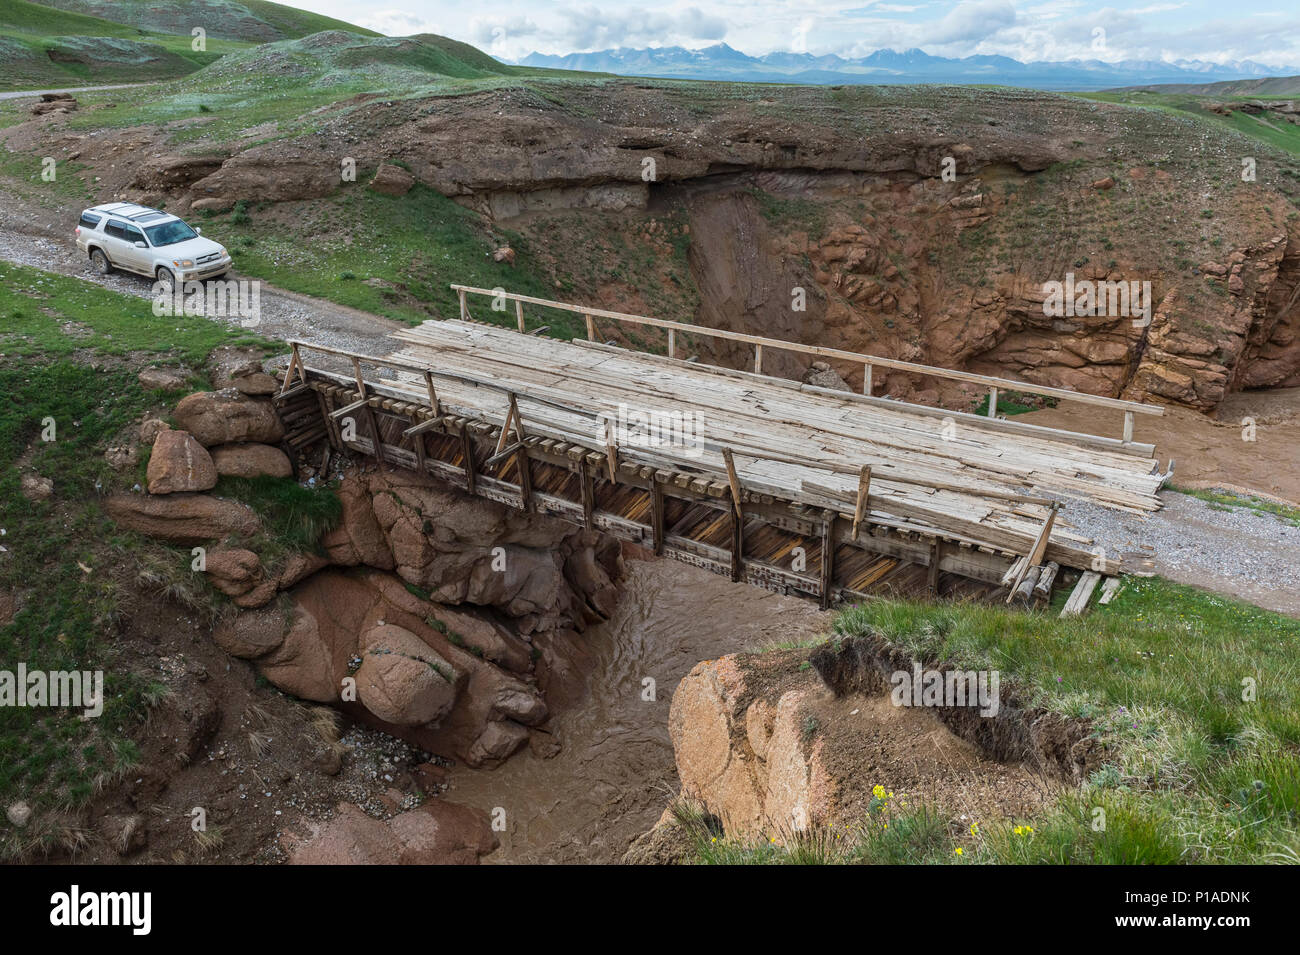 Four wheel drive car crossing a wooden bridge over a wild gorge, Naryn  Province, Kyrgyzstan Stock Photo - Alamy